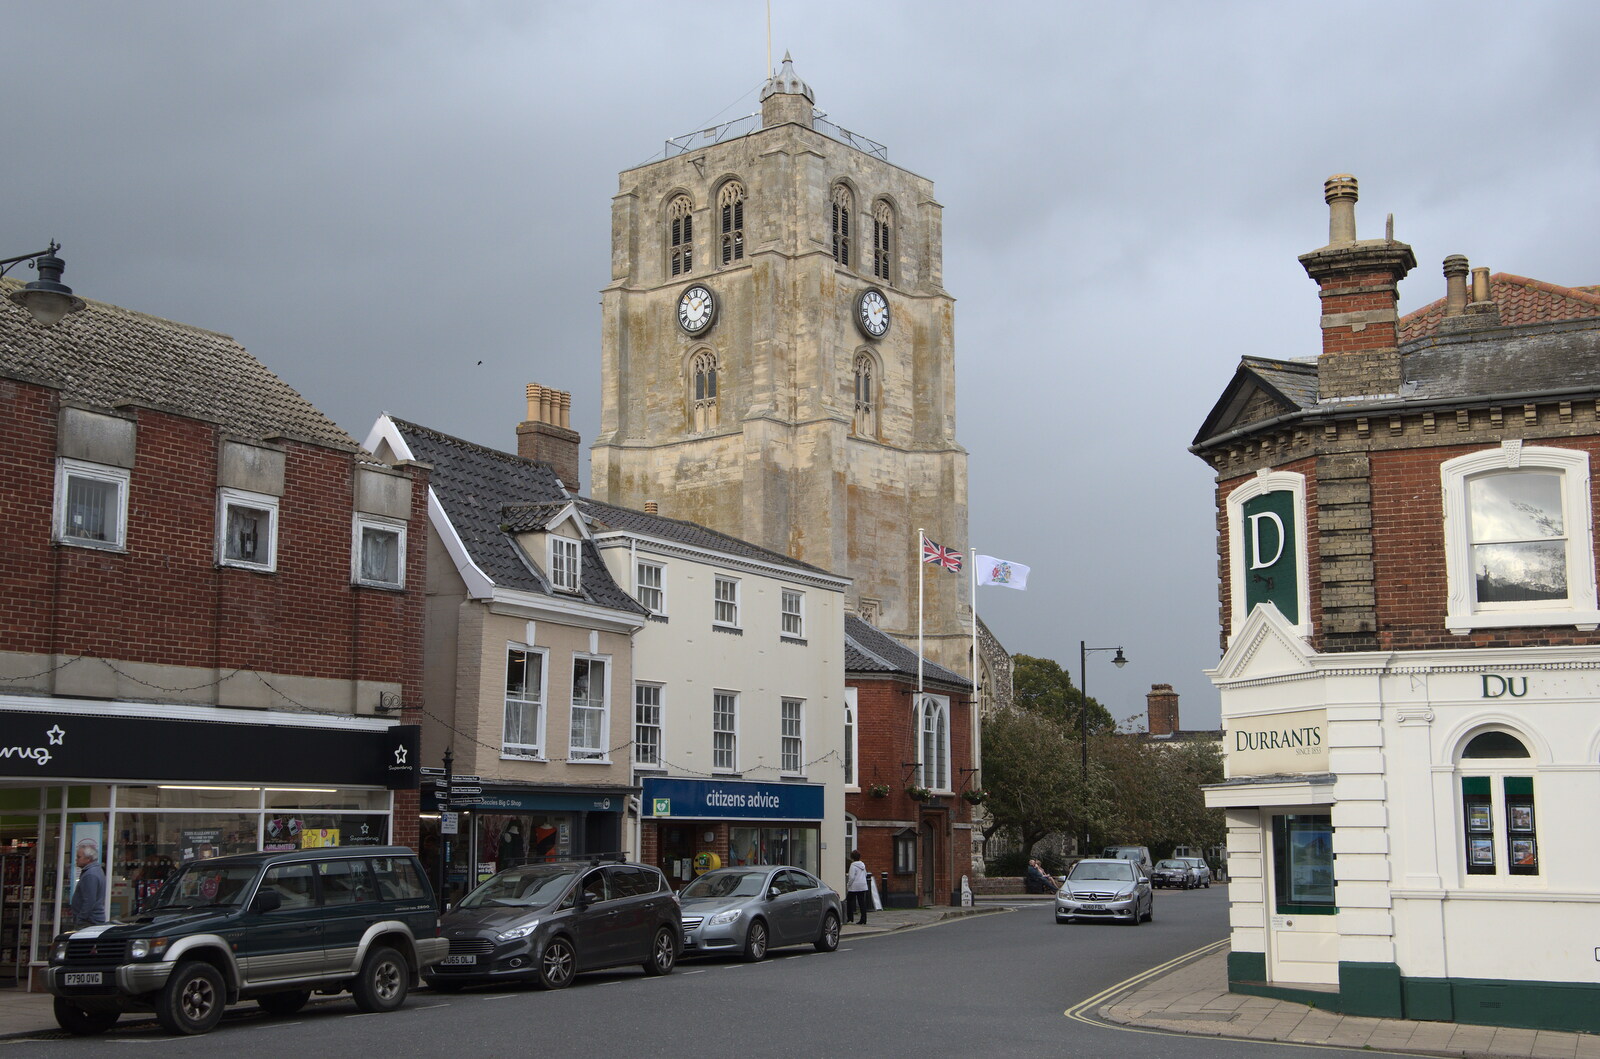 An Afternoon in Beccles, Suffolk - 26th October 2022: Beccle's church tower